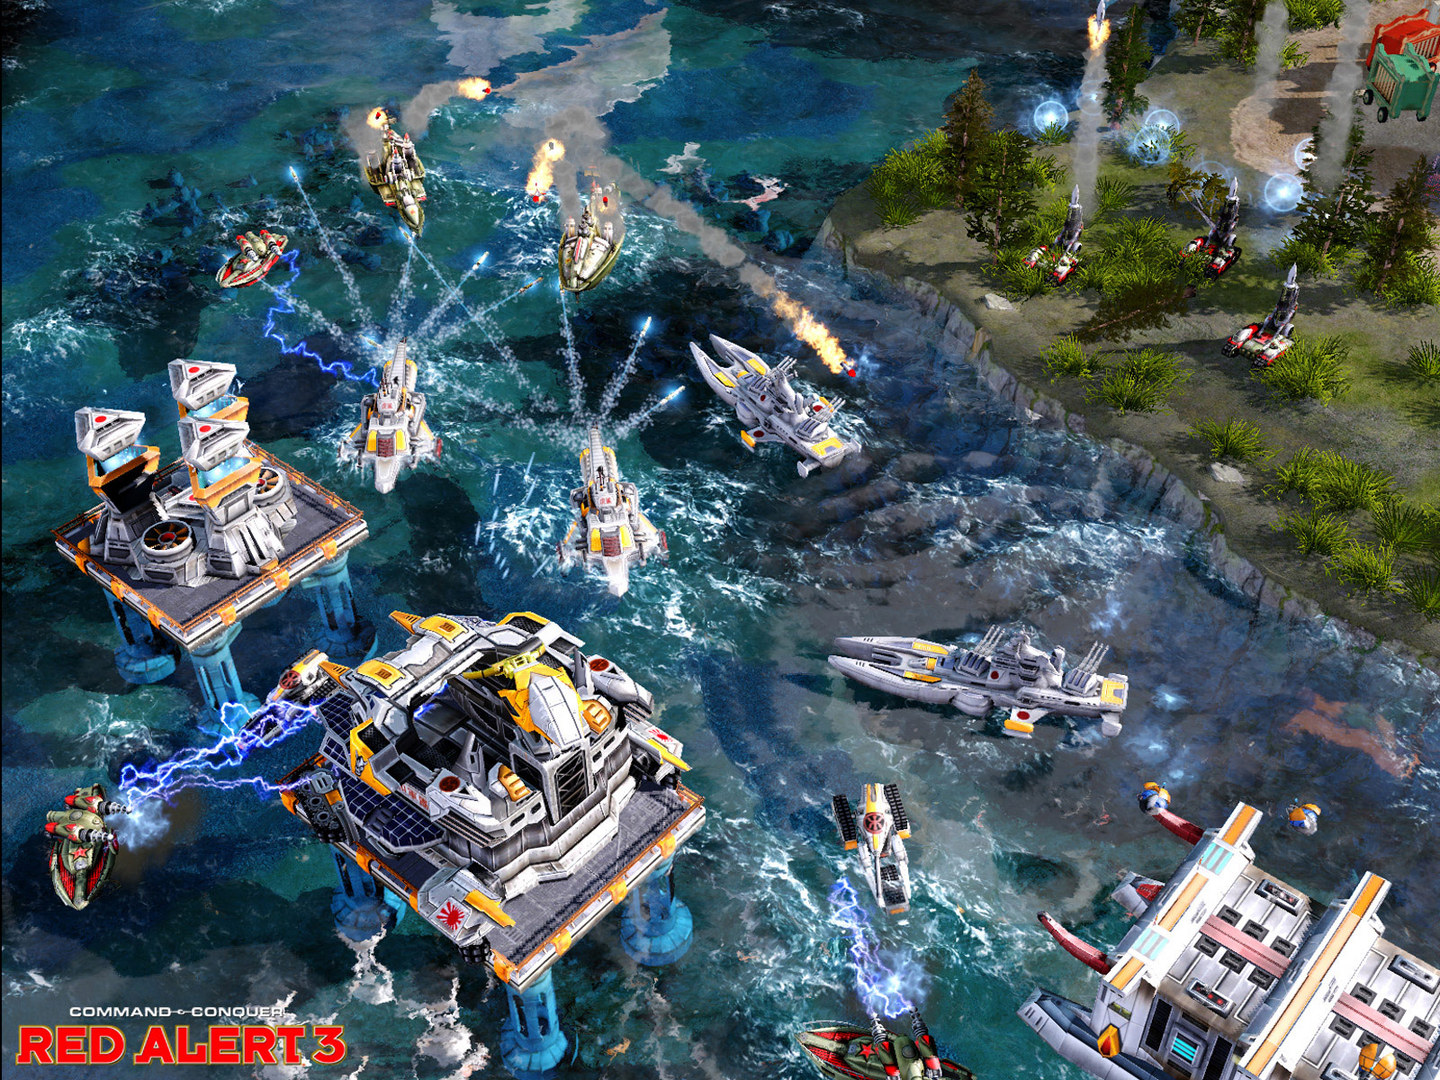 command-and-conquer-red-alert-3-free-download-ocean-of-games